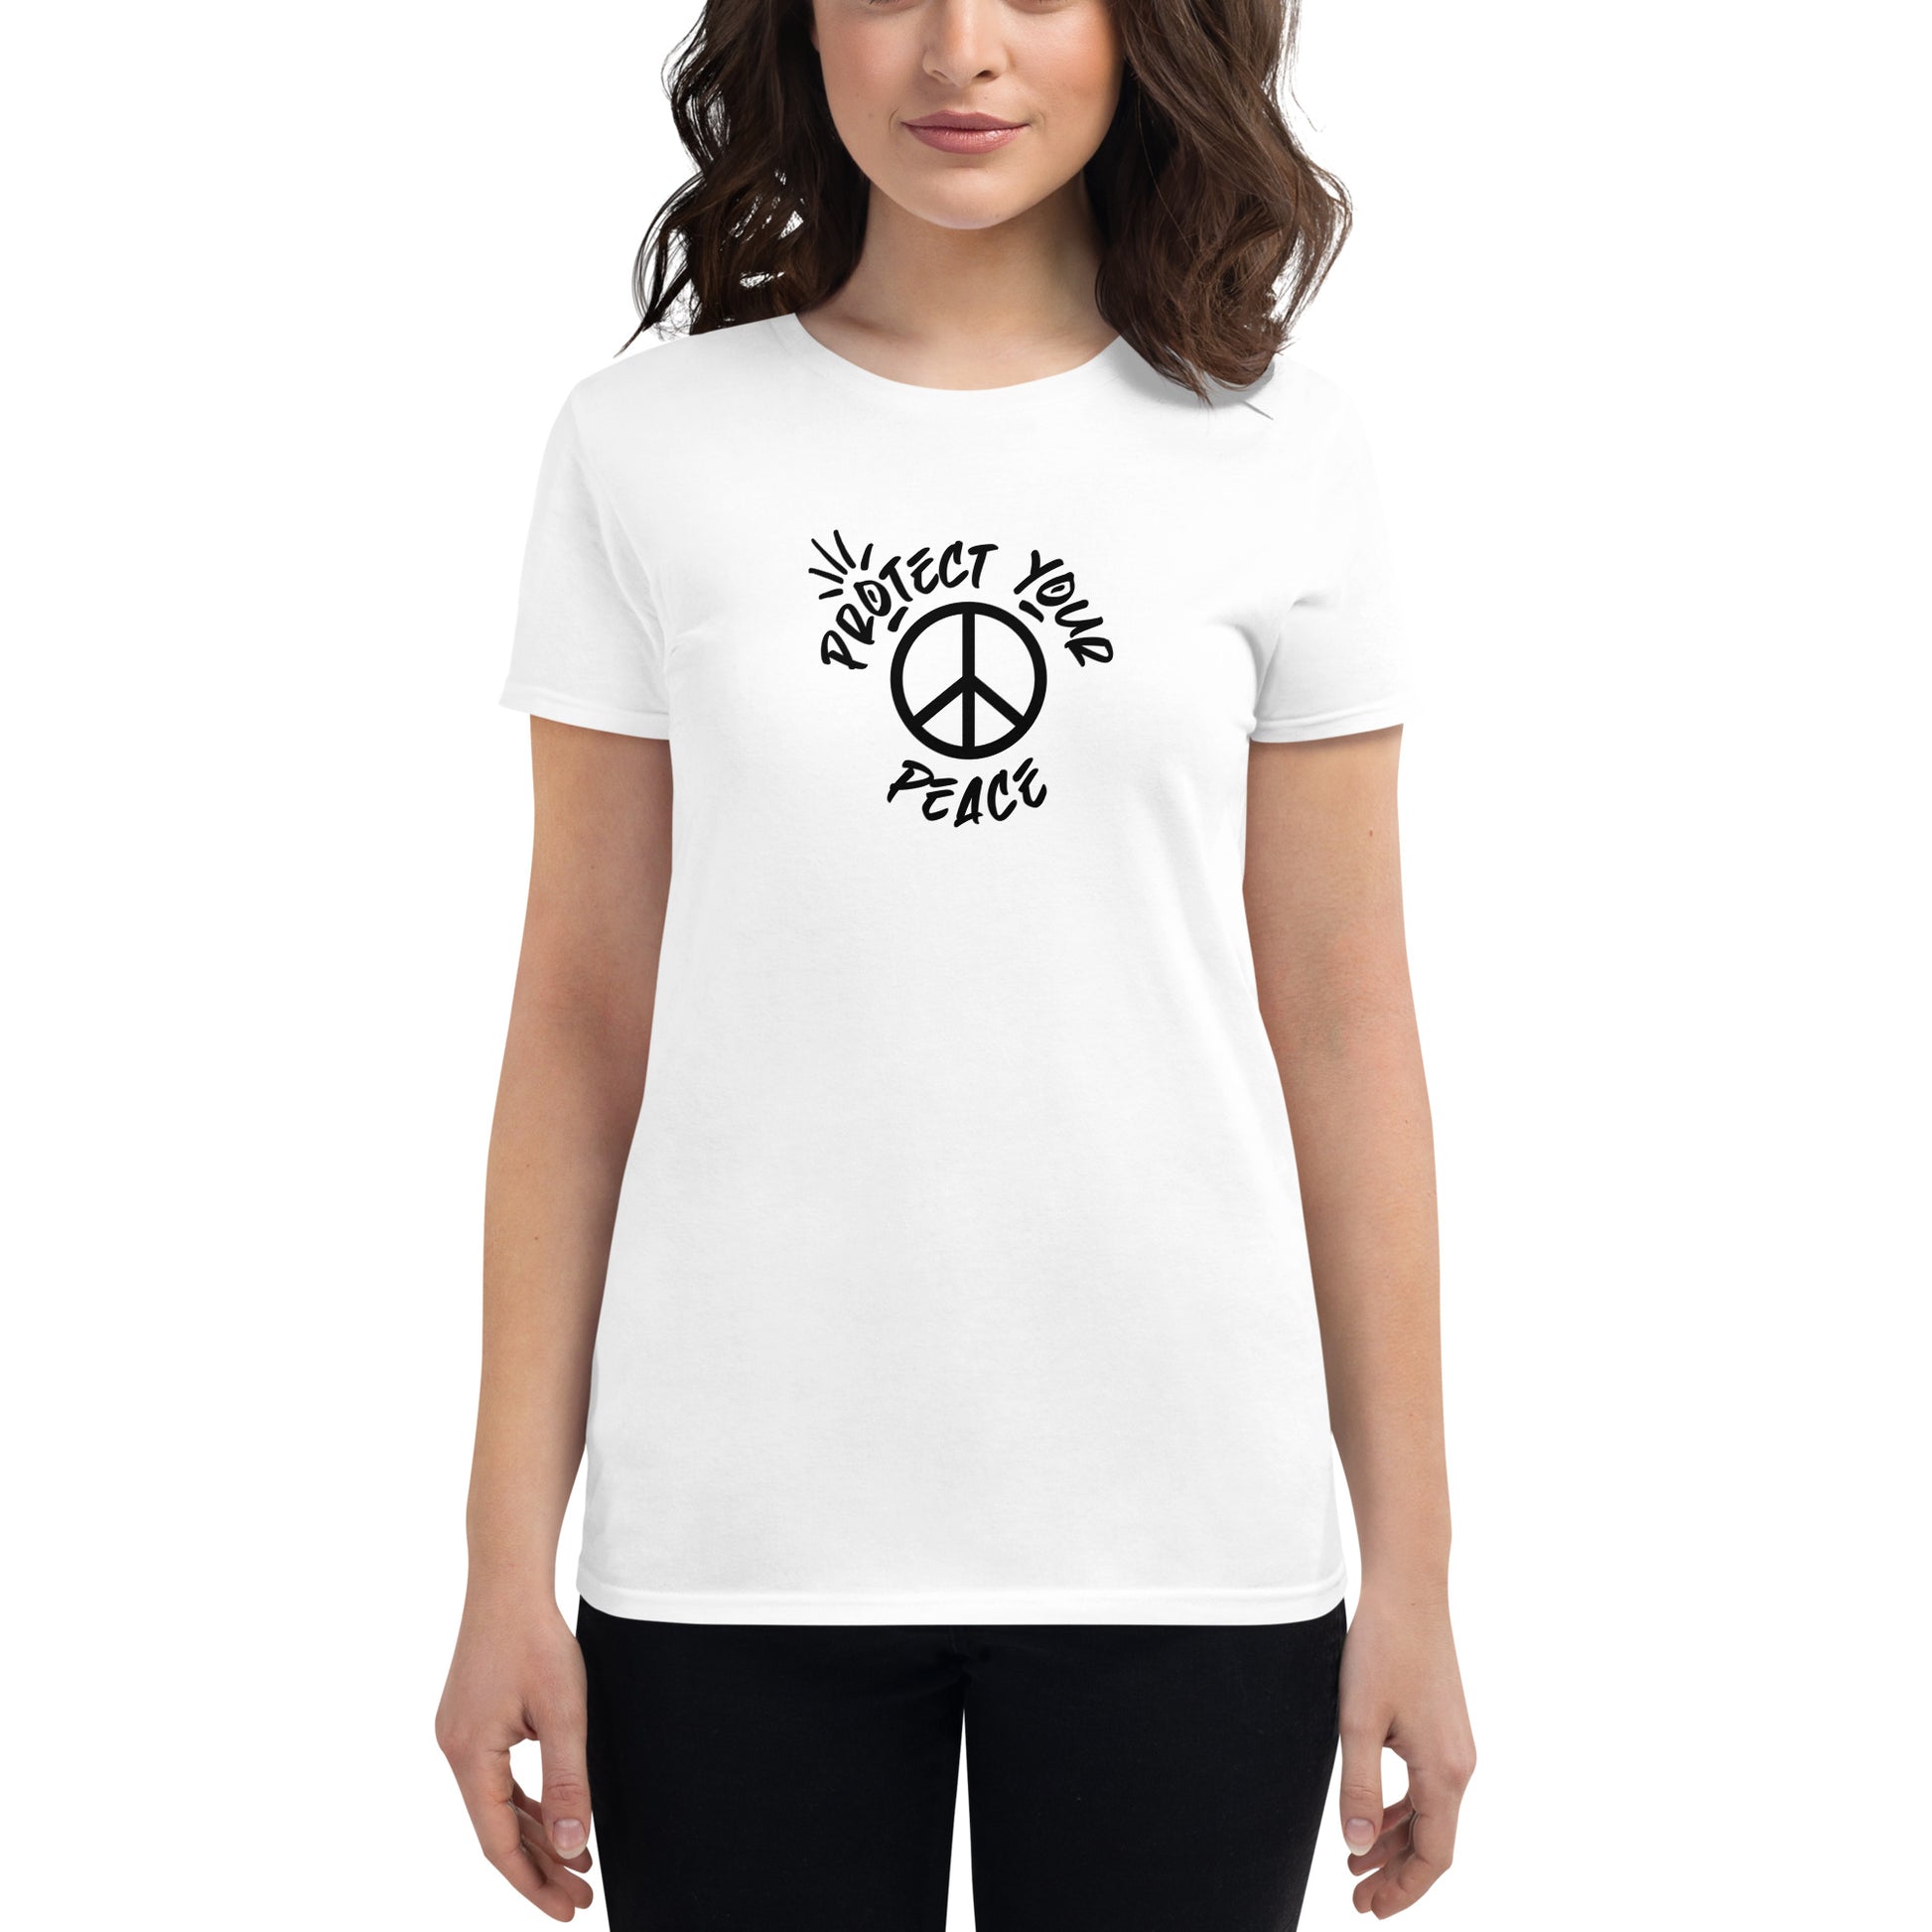 Protect Your Peace - Tribe of Weirdos Women's T-Shirt in black, showcasing bold white text and tribal design, symbolizing unity and personal empowerment.